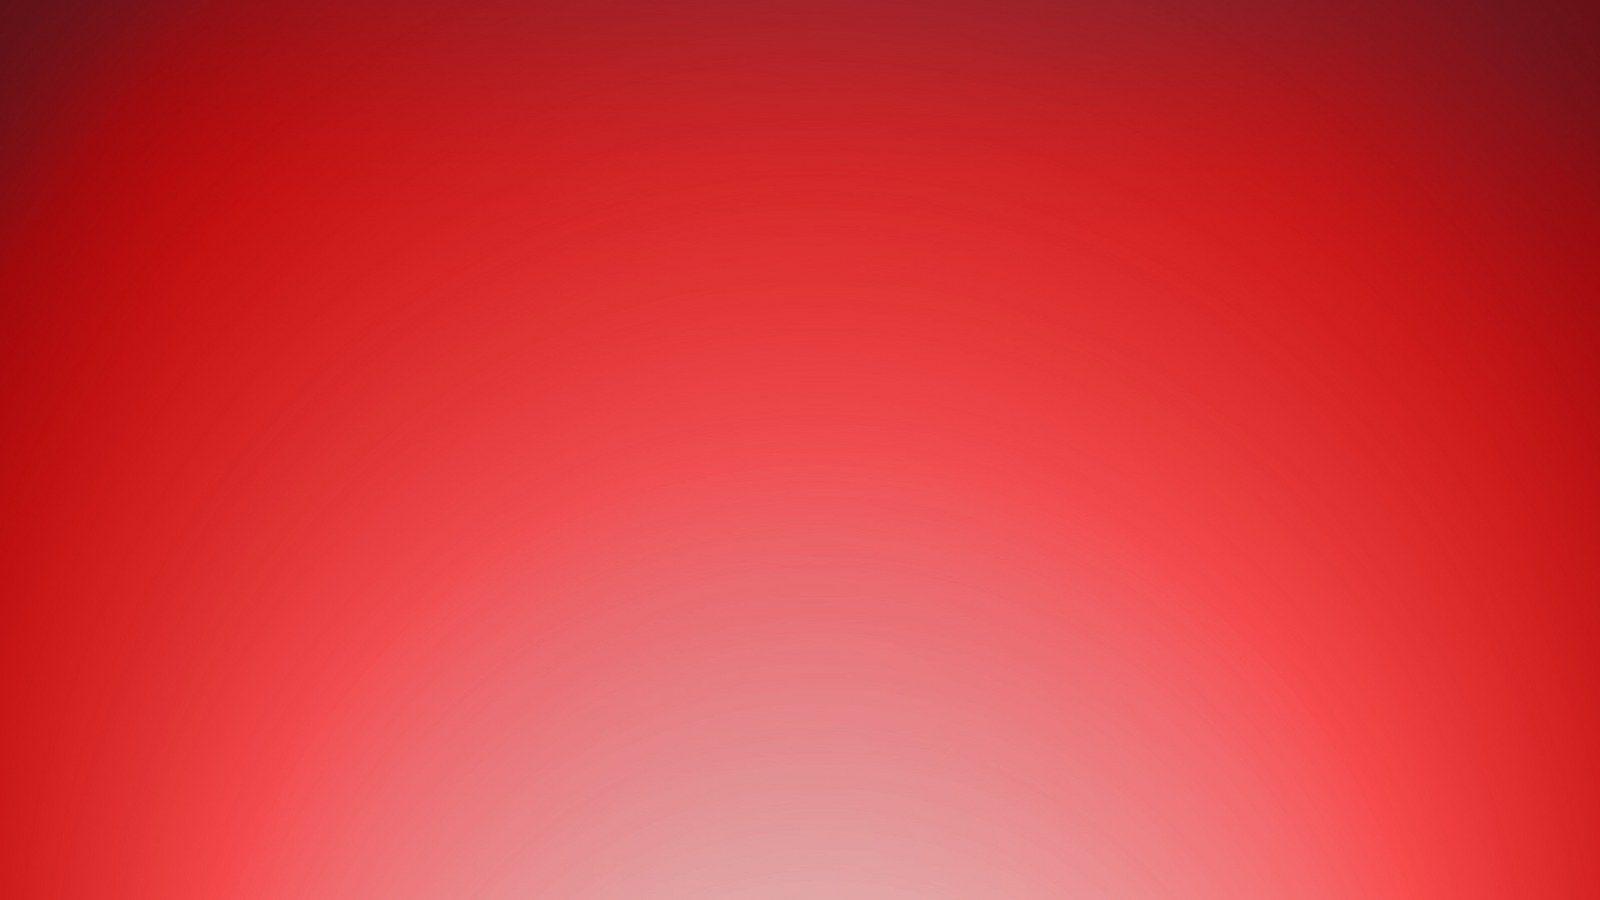 Red Background Texture Free Downloads Wallpaper